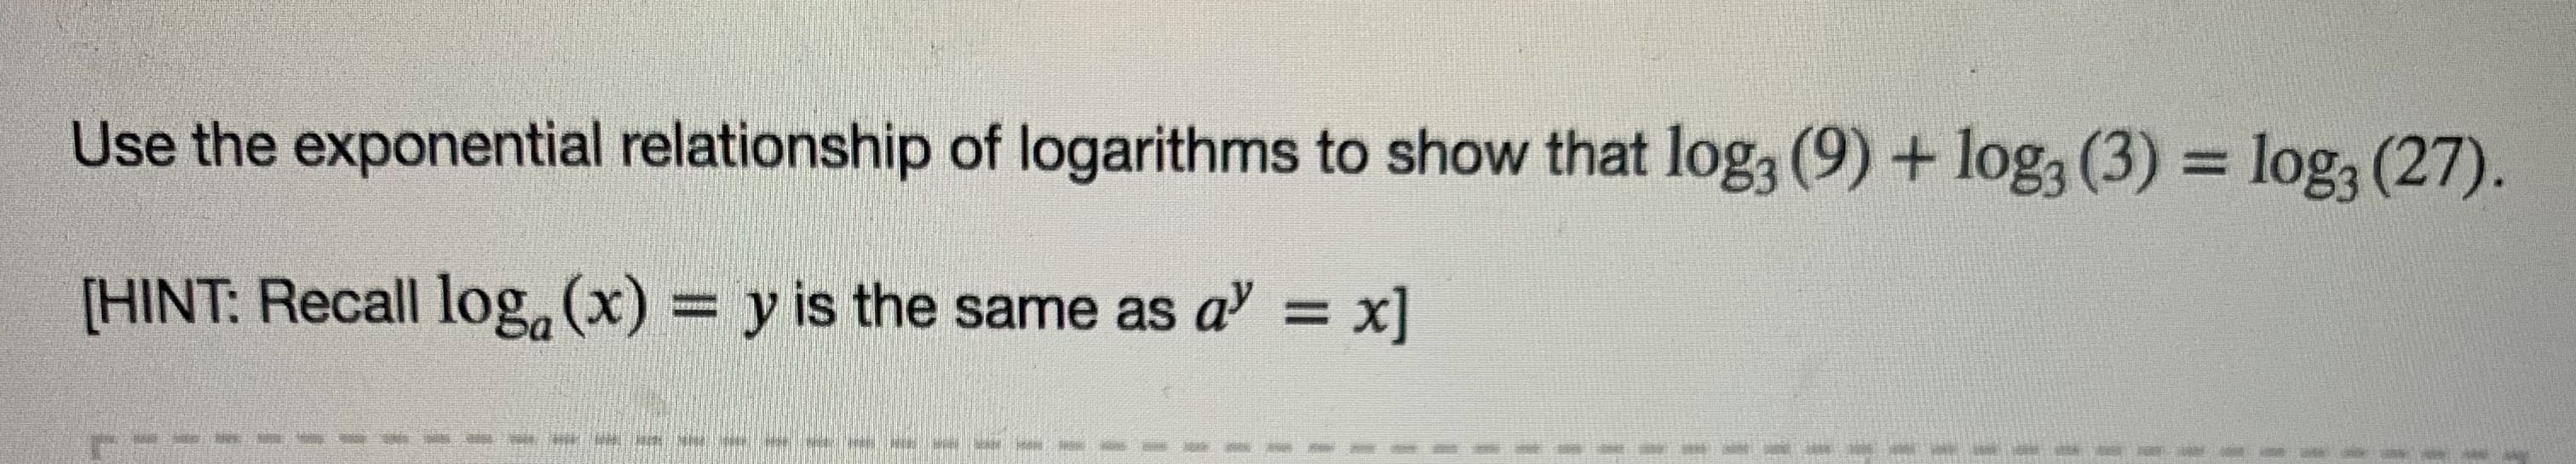 Use the exponential relationship of logarithms to show that log, (9) + log, (3) = log, (27).
%3D
[HINT: Recall log, (x) = y is the same as a' = x]
%3D
